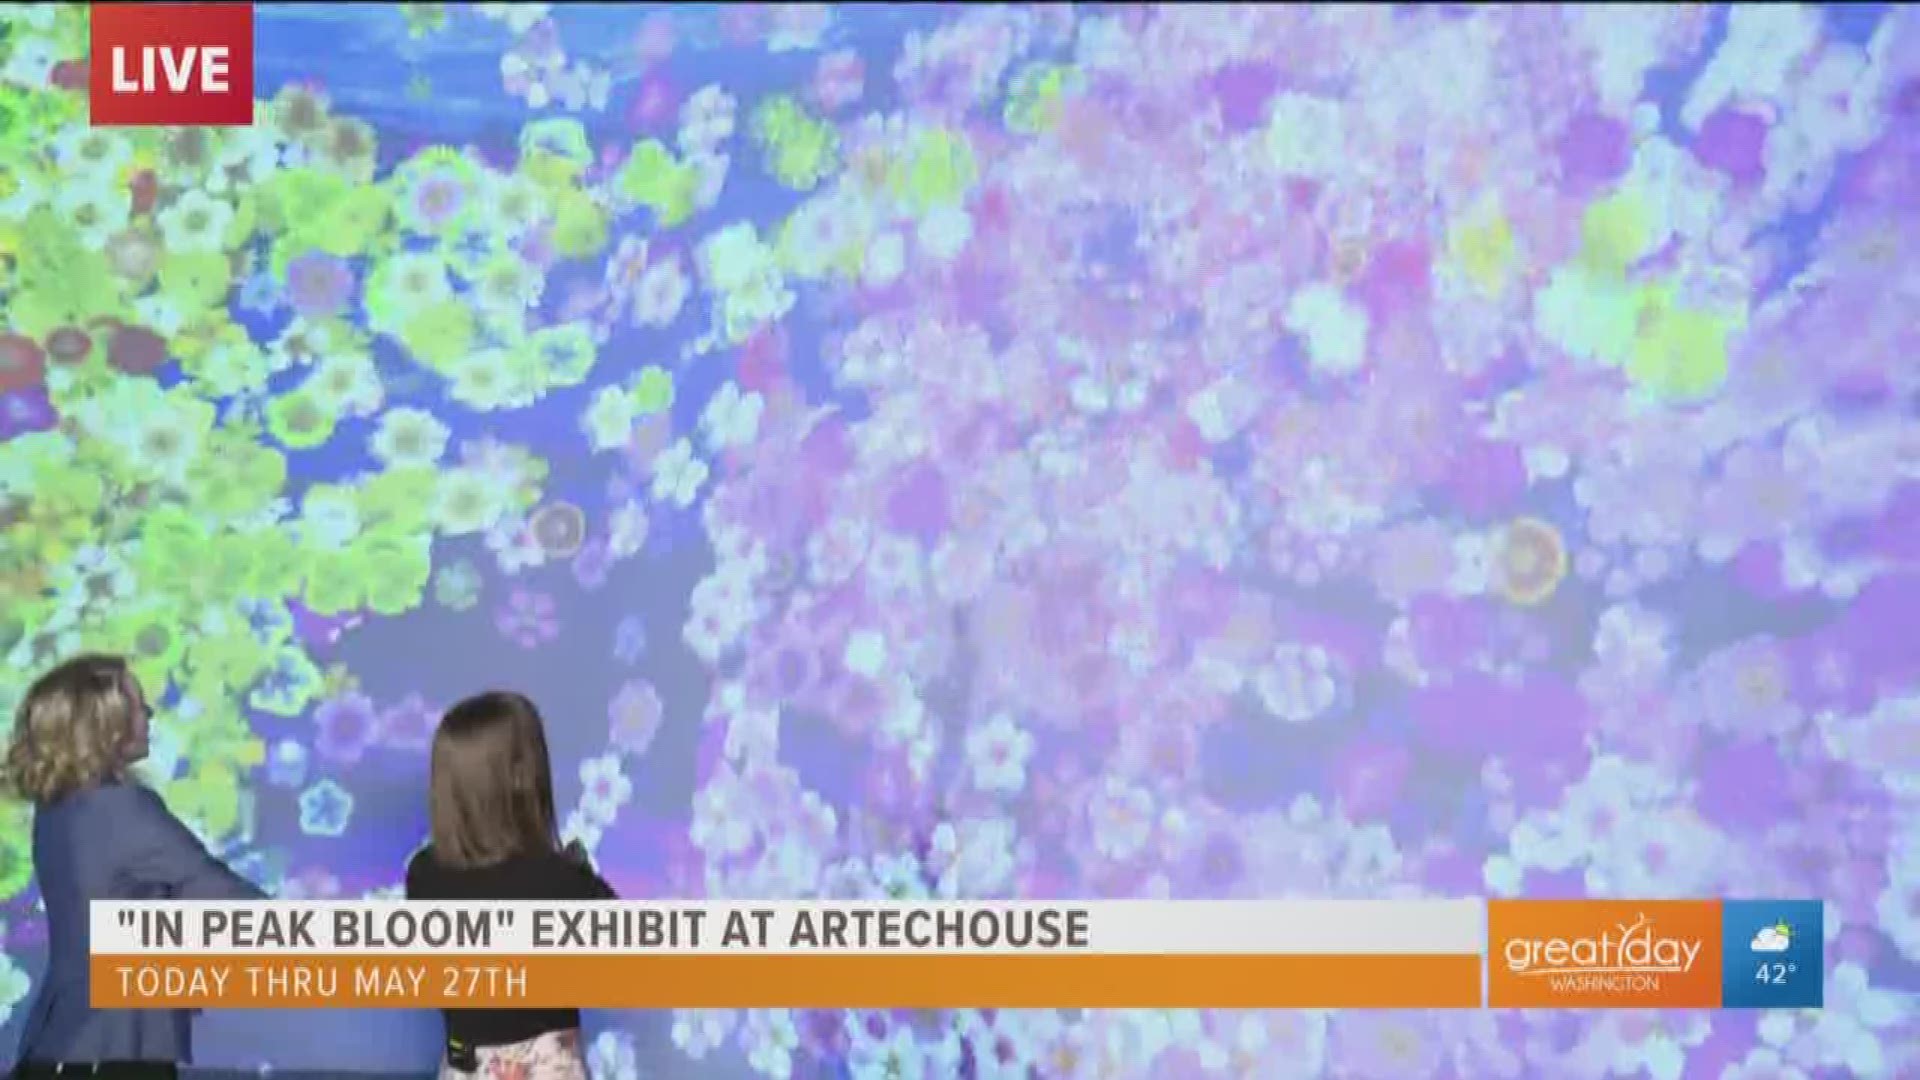 The "In Peak Bloom" exhibit at Artechouse has opened just in time for the first day of spring and features high-tech works of art that you can enjoy from now till May 27.